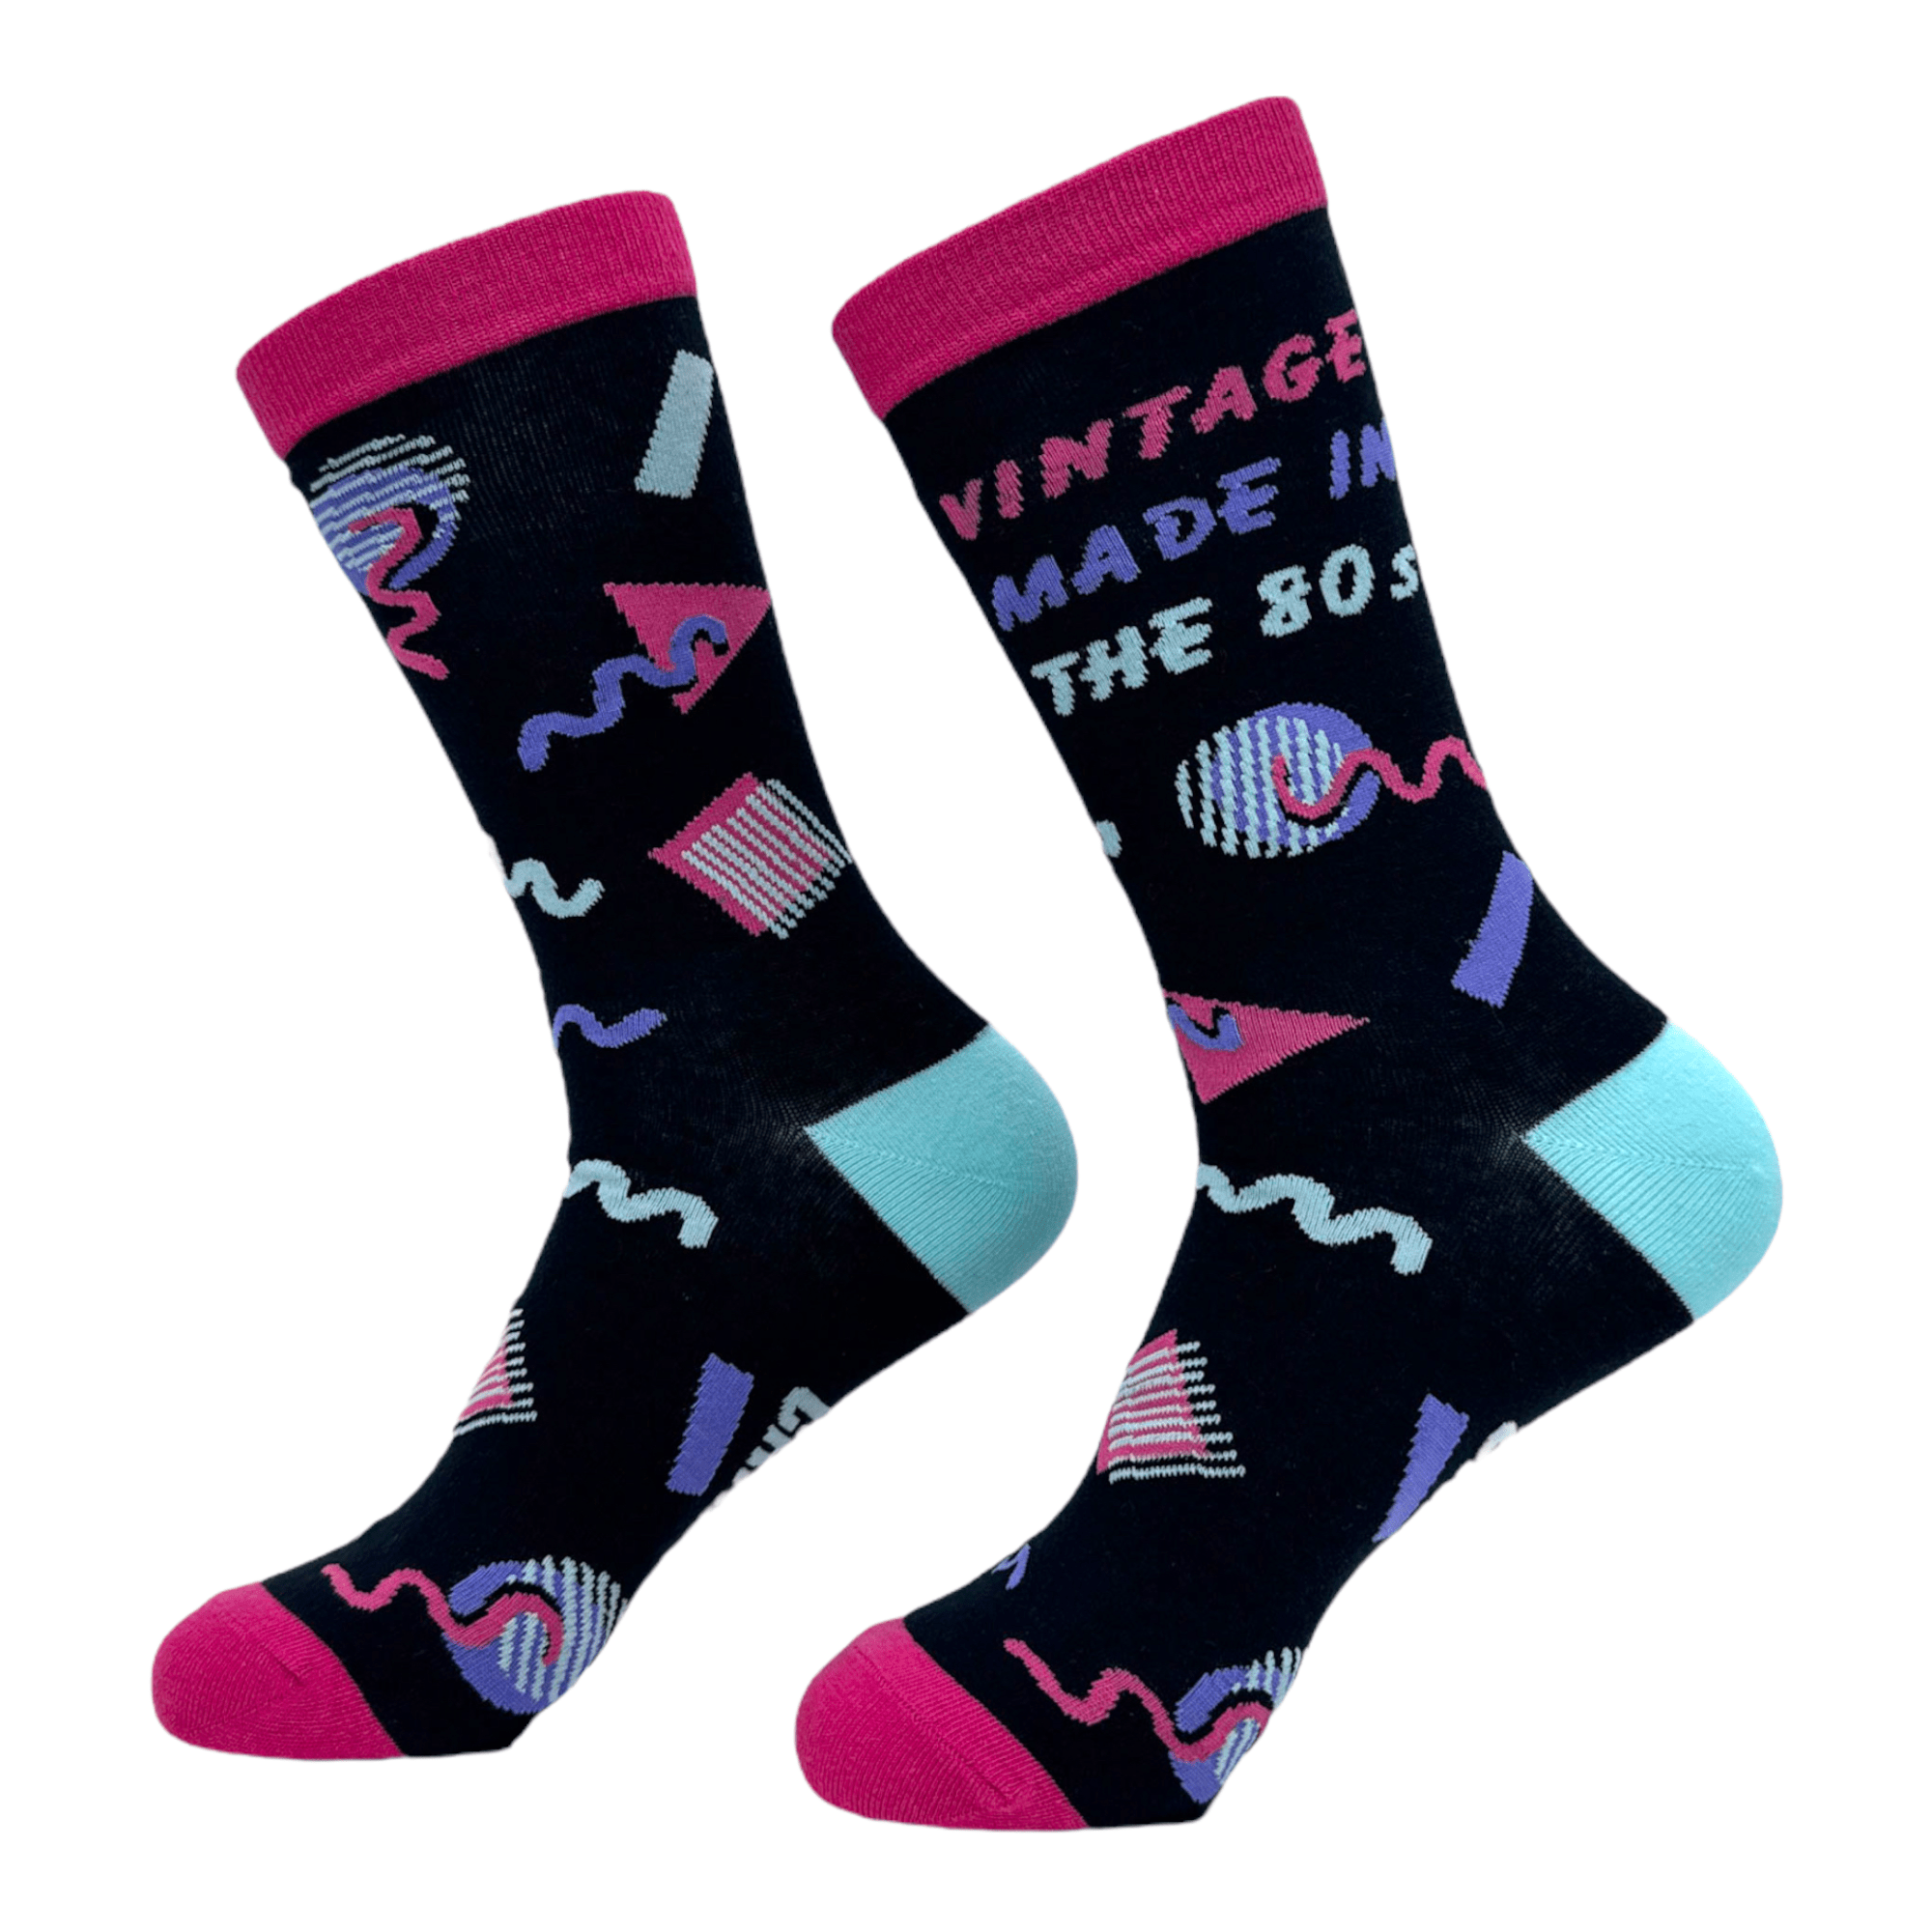 Women's Vintage Made In The 80s Socks  -  Crazy Dog T-Shirts